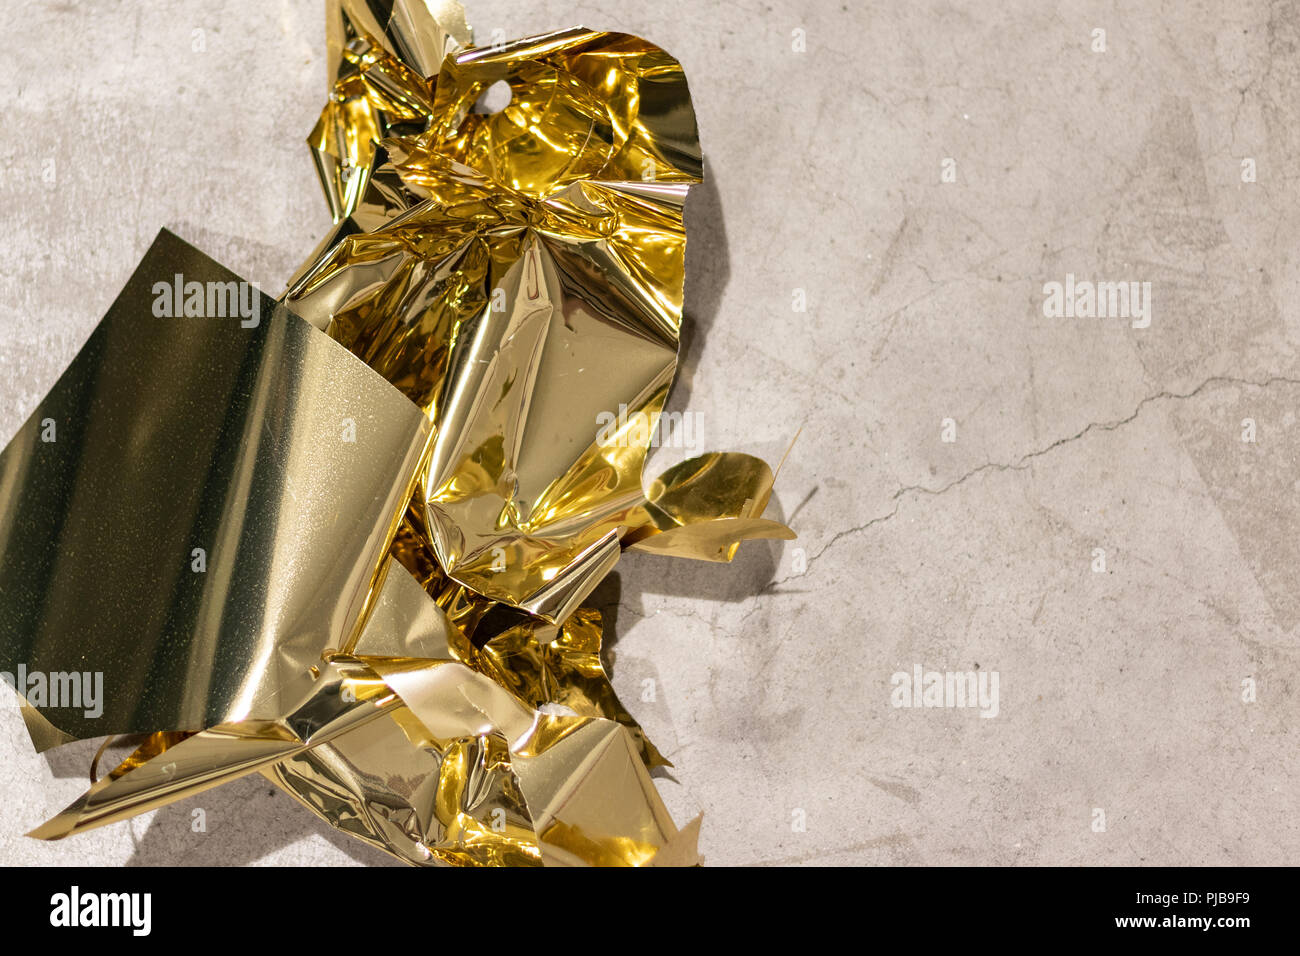 Golden scraps on conrete floor after a massive cutting session for christmas decorations. Stock Photo